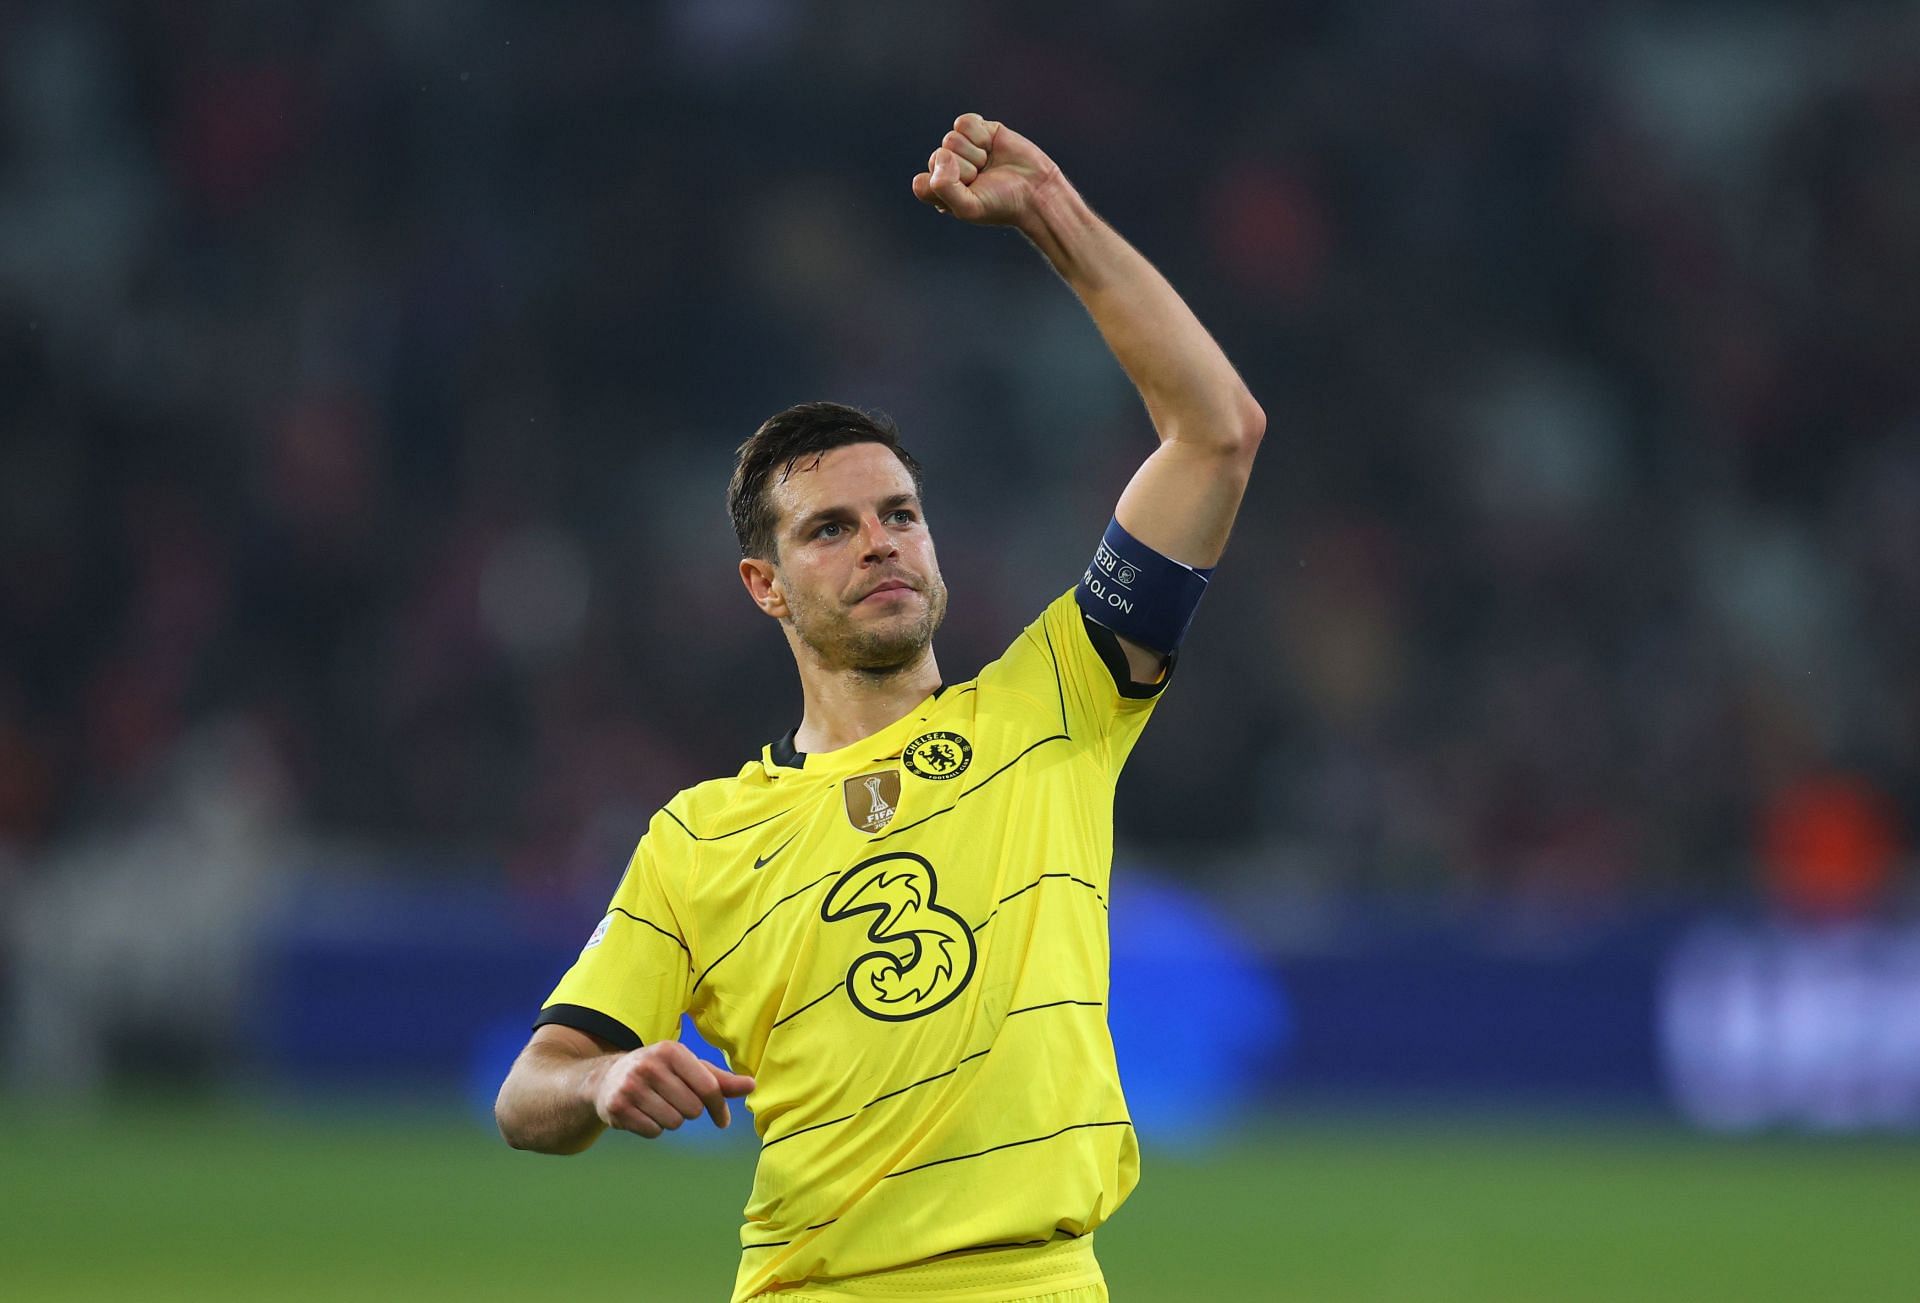 Cesar Azpilicueta has emerged as one of the most reliable players at Chelsea